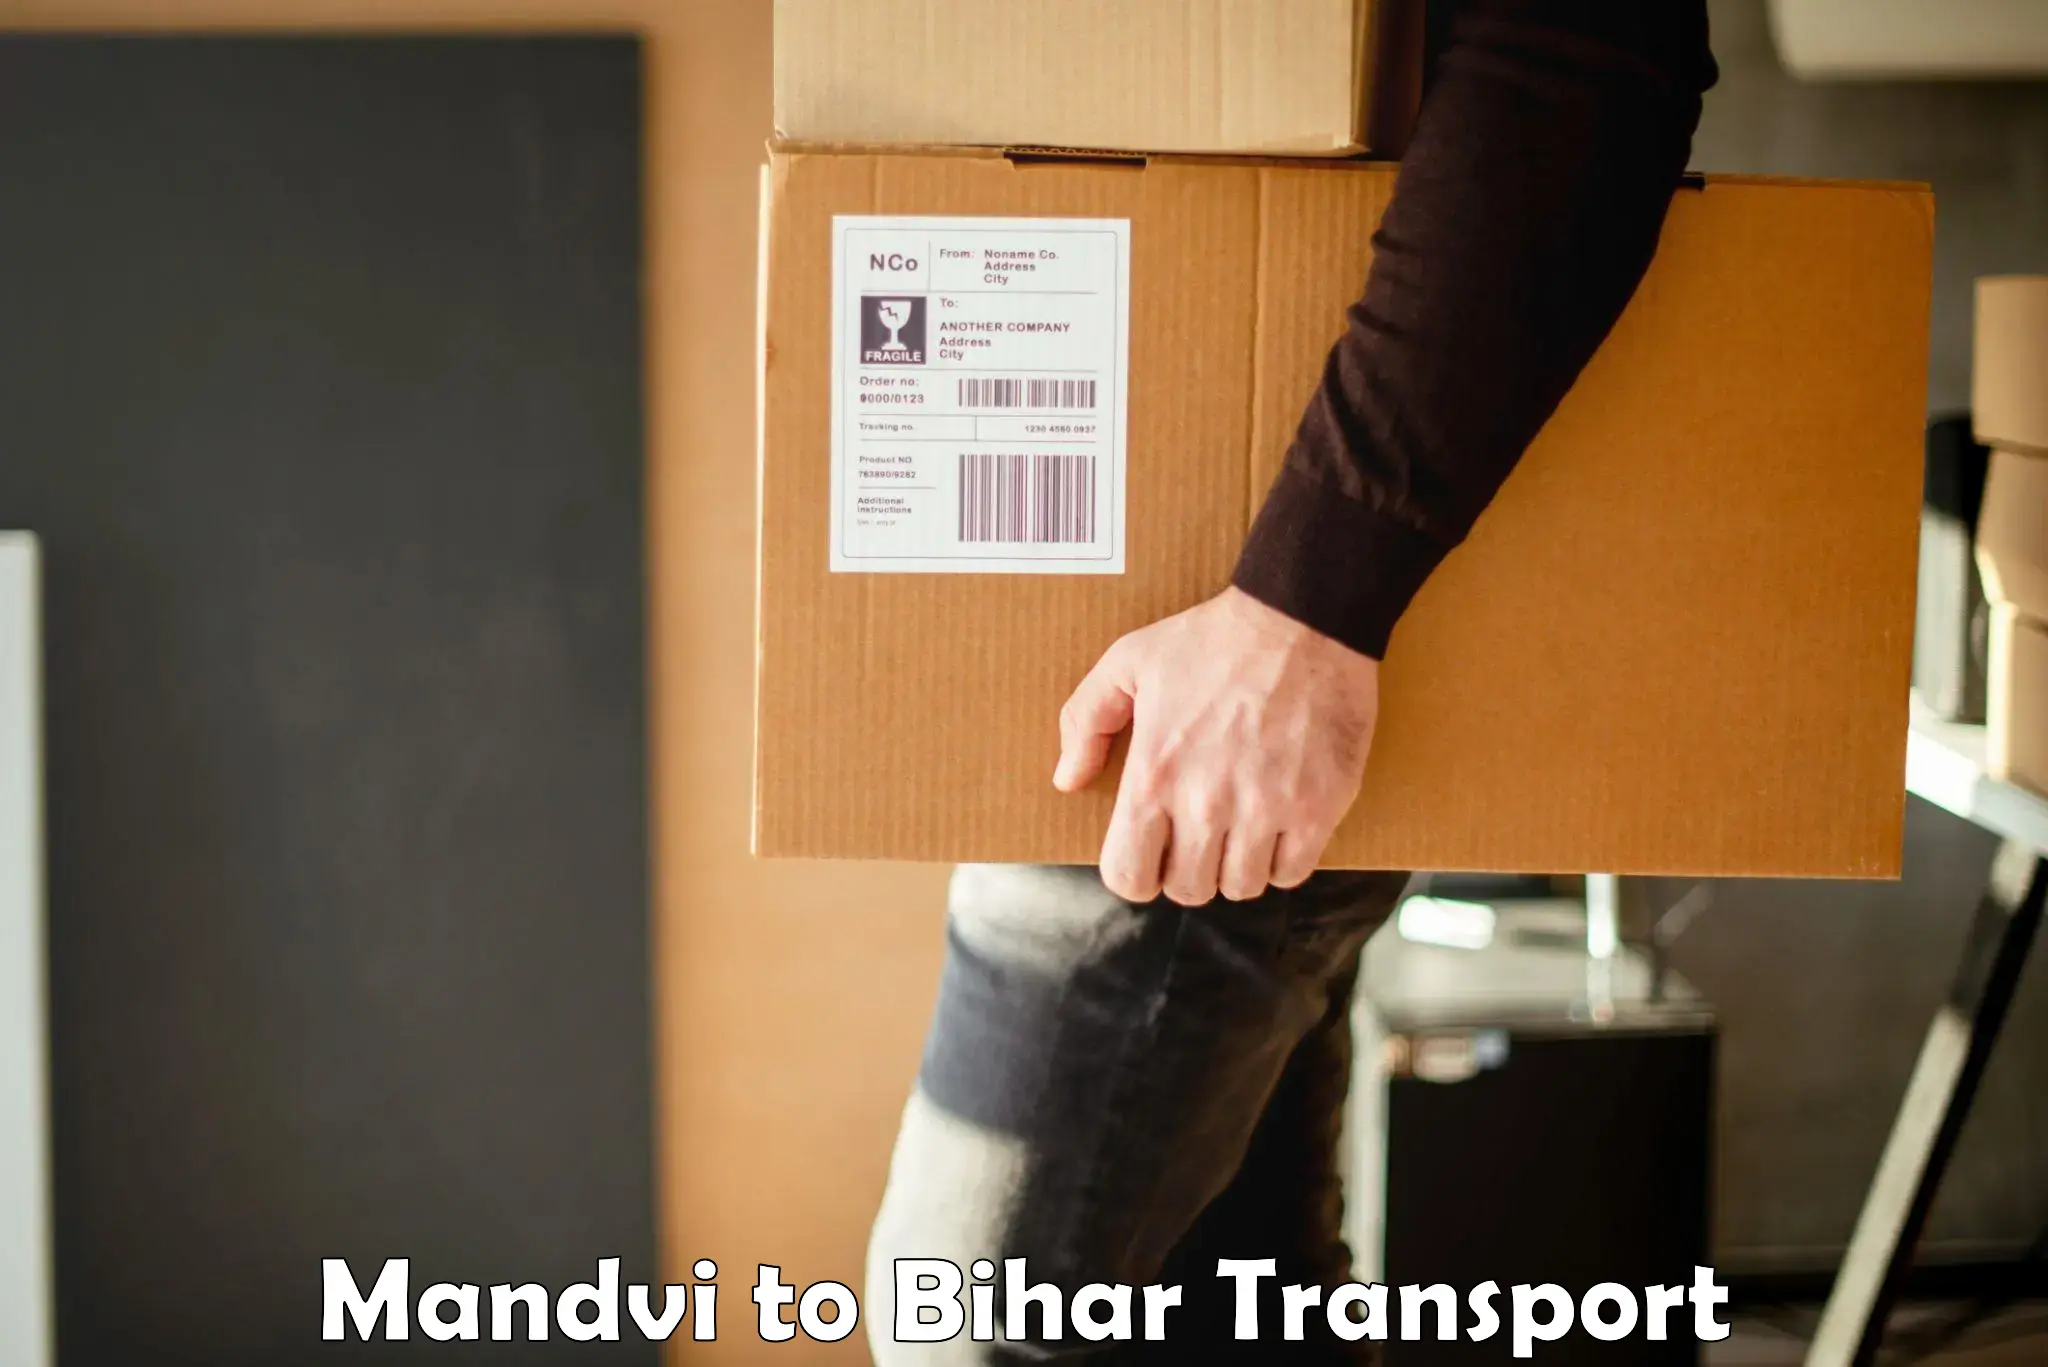 Truck transport companies in India Mandvi to Bankipore